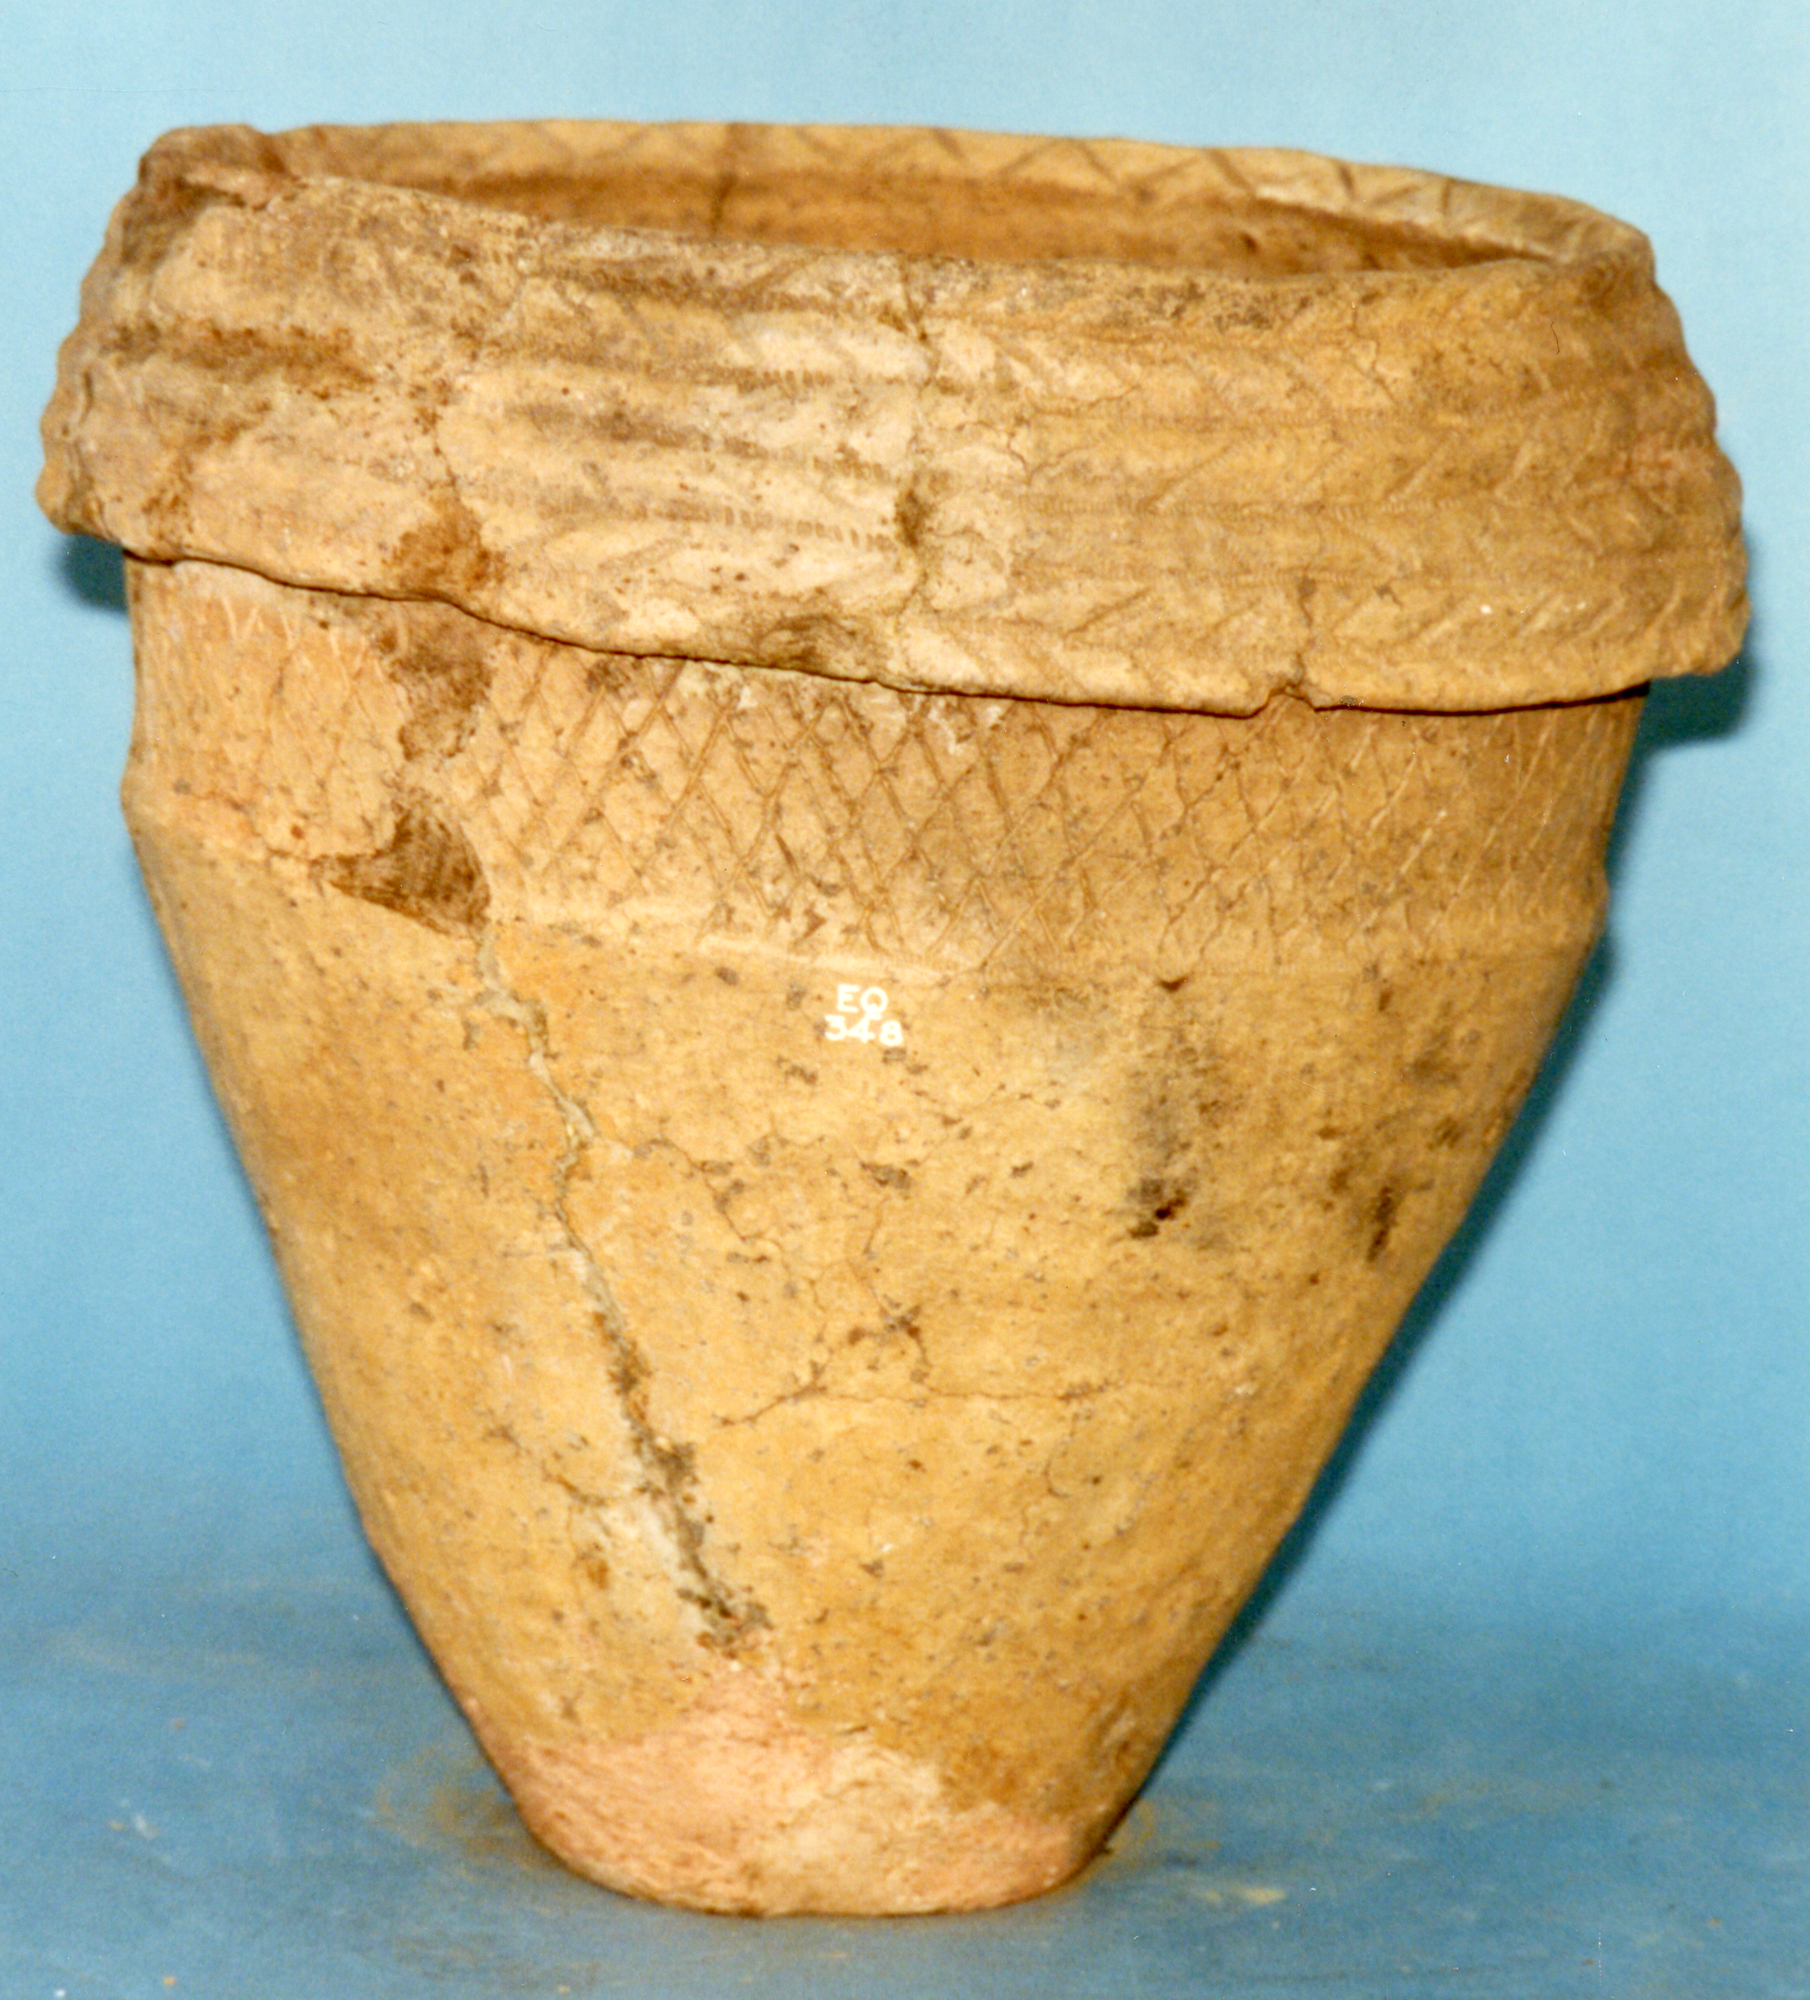 Image of Urn of dark ware with heavy overhanging rim, decorated with zigzag, lattice and other patterns, from Kettle Farm, Fife © National Museums Scotland